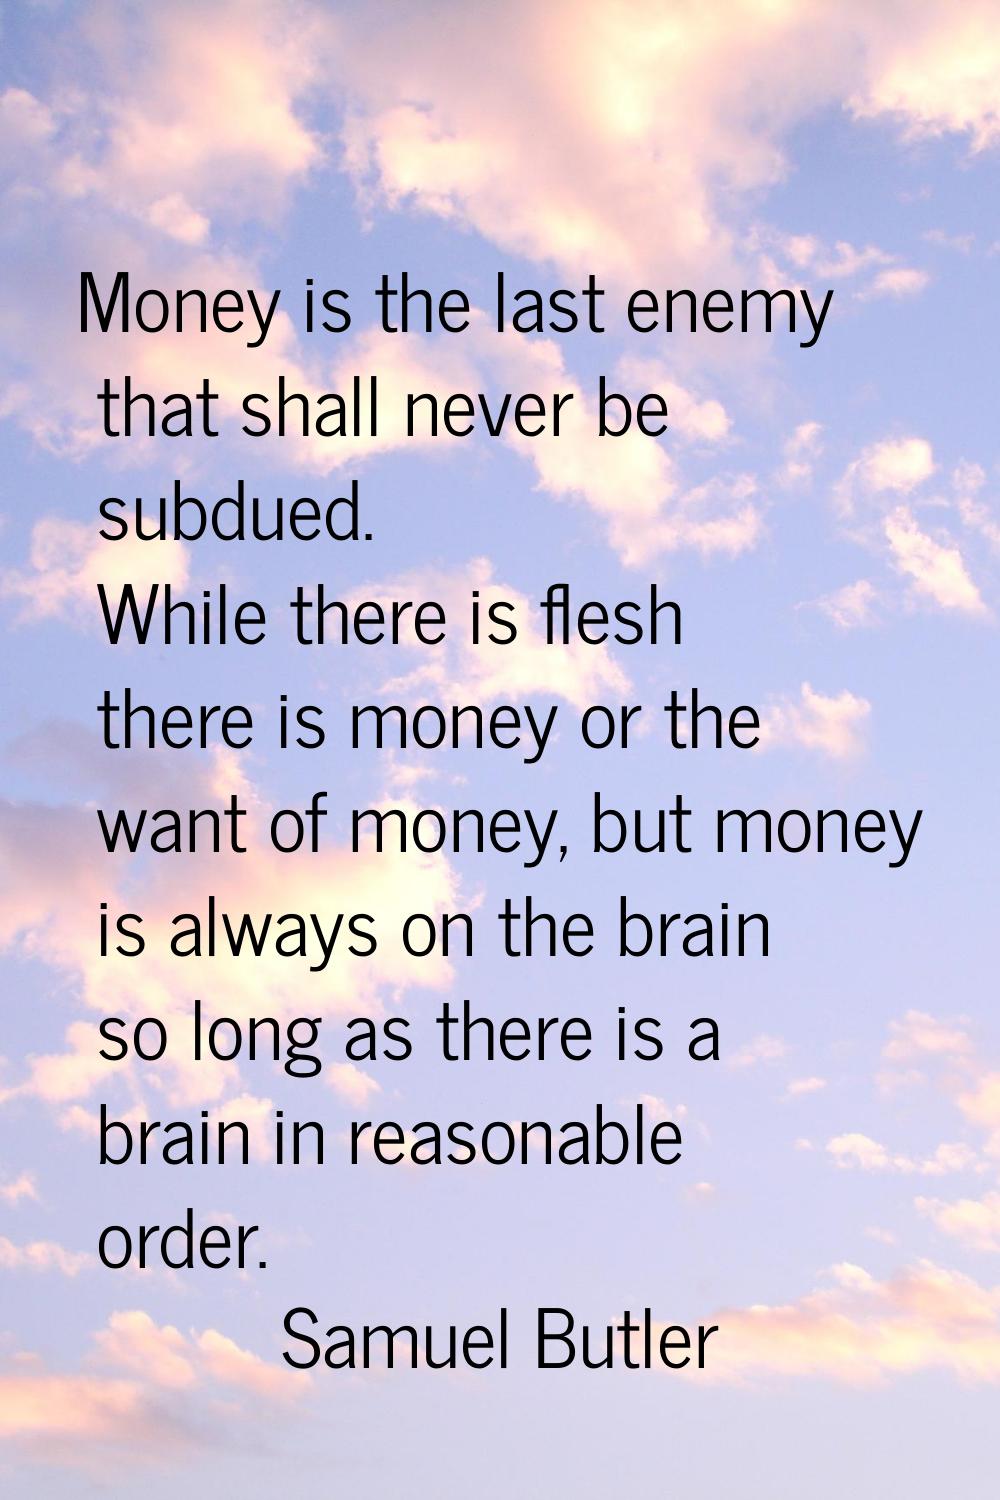 Money is the last enemy that shall never be subdued. While there is flesh there is money or the wan